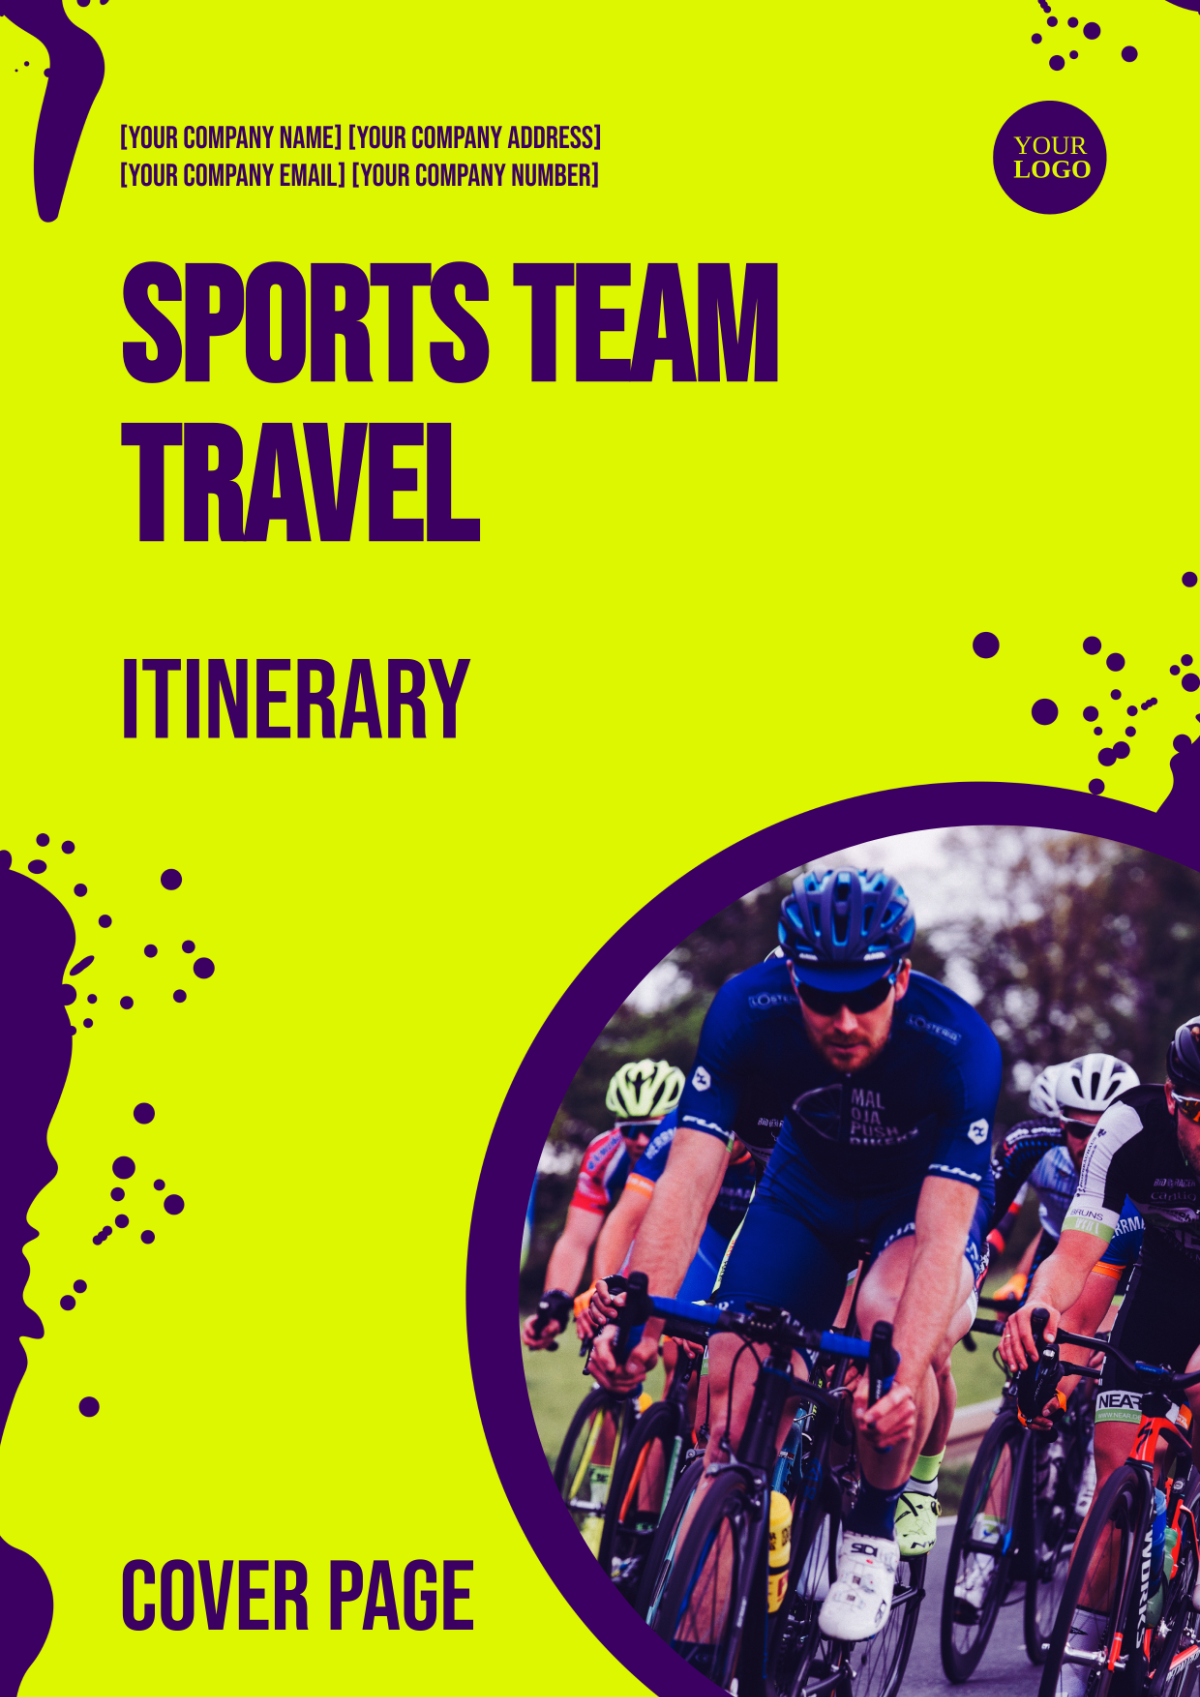 Sports Team Travel Itinerary Cover Page